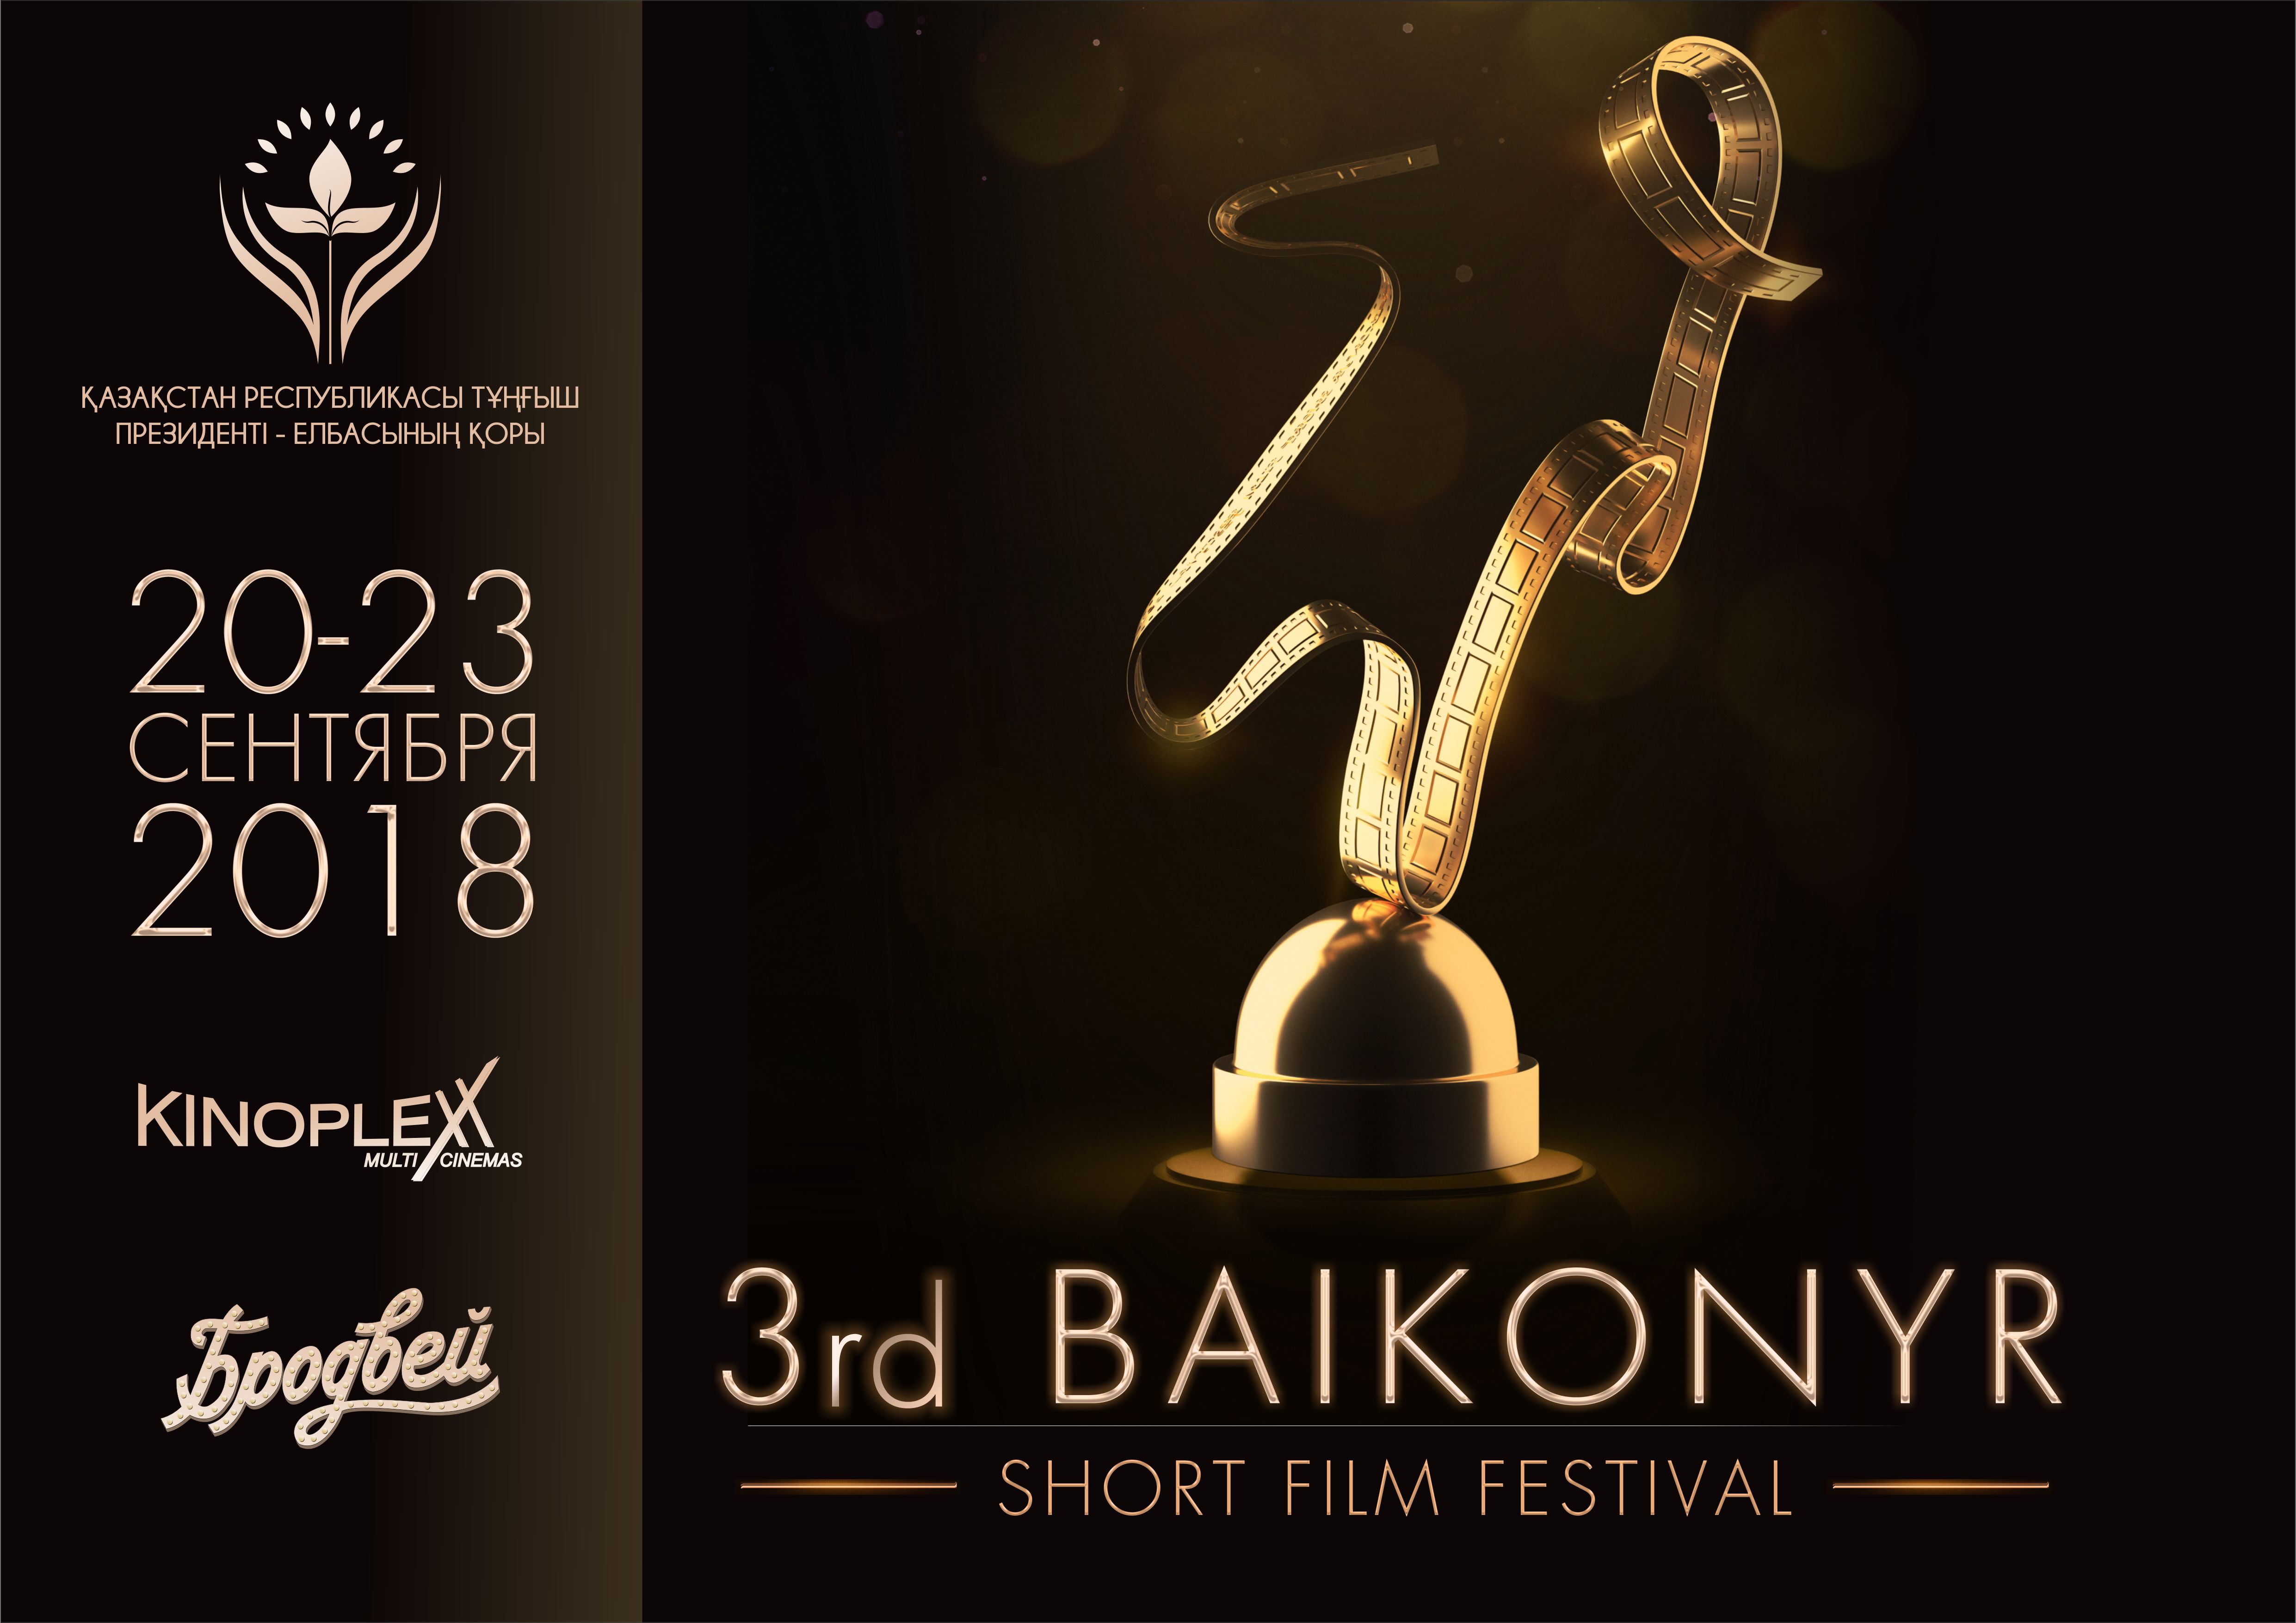 11 interesting facts about the Baiqonyr Short Film Festival